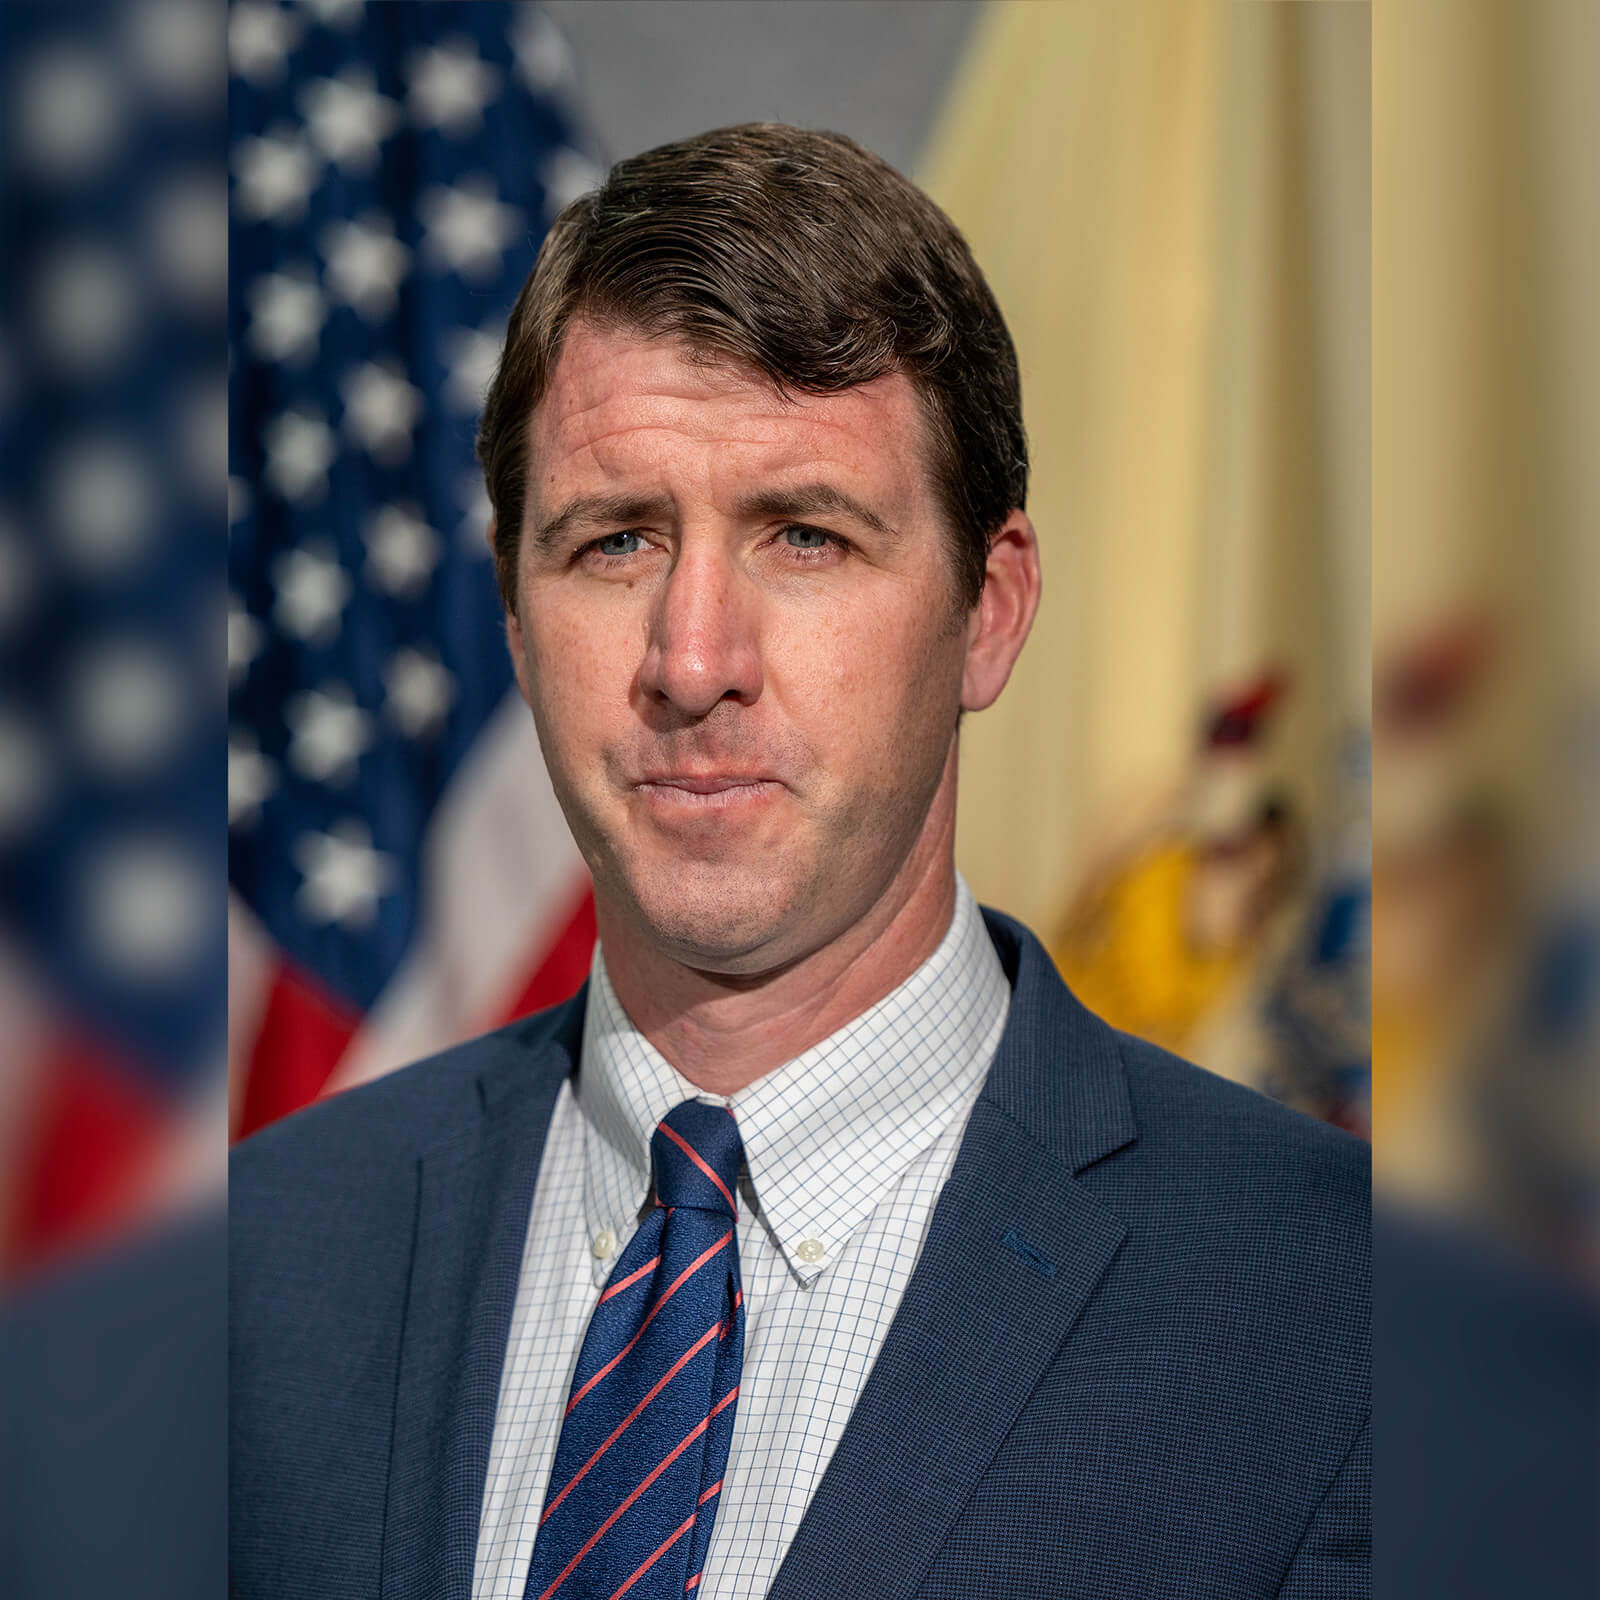 A man with brown hair wears a blue suit jacket and blue tie with red stripes while posing in front of American flag and looking off camera.